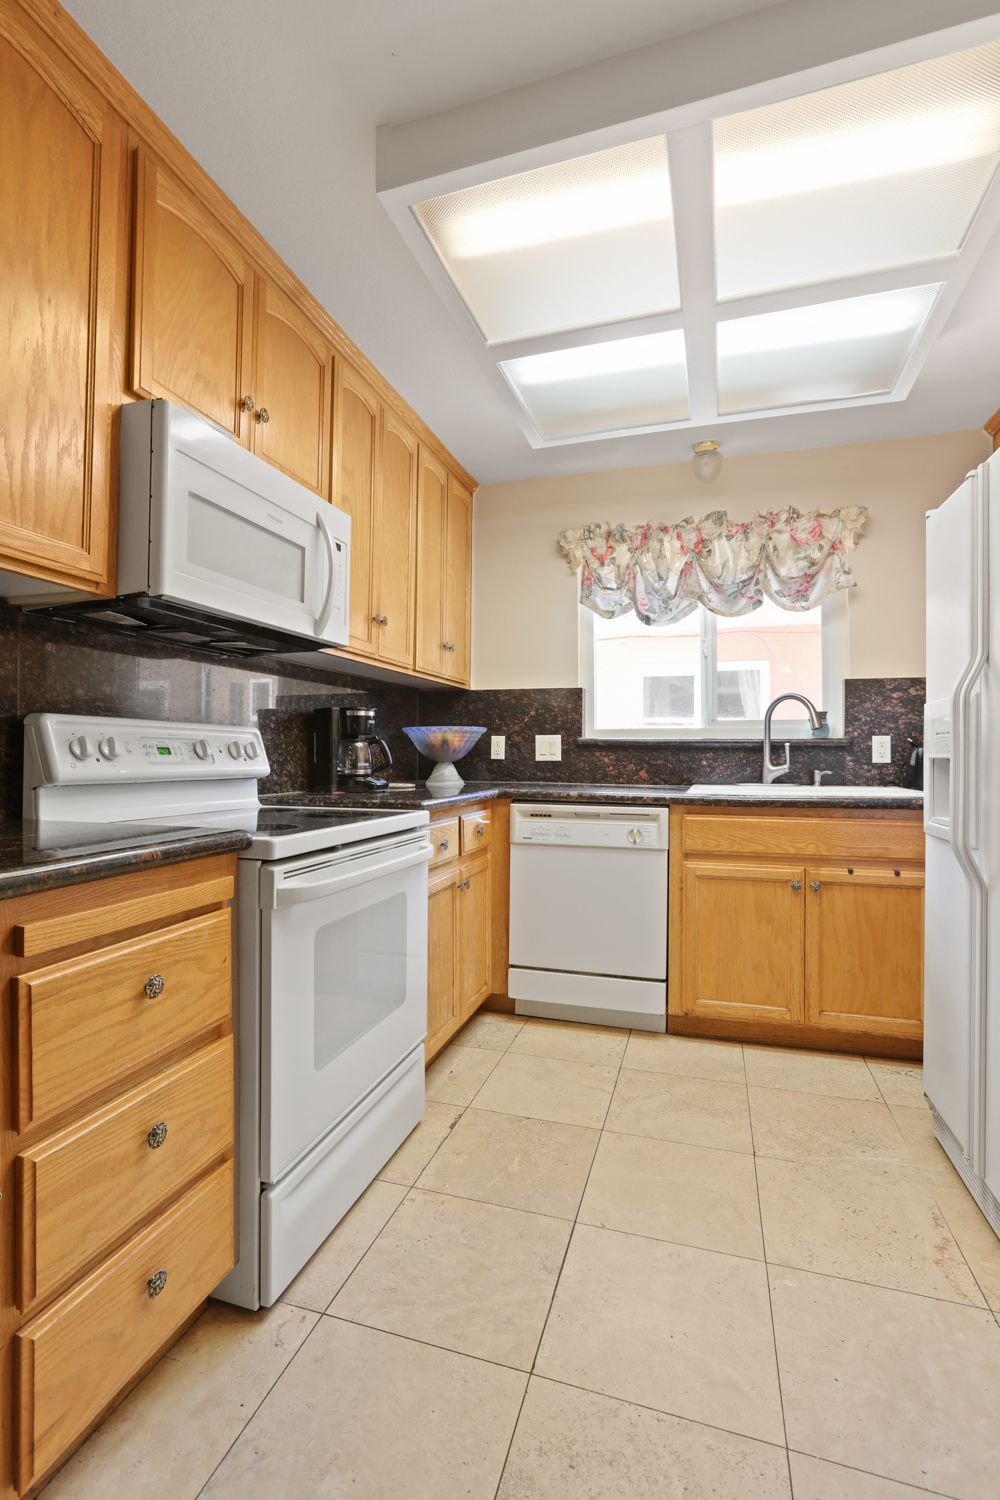 Interior view of Robert Creek Villa II senior living community featuring a well-equipped kitchen.